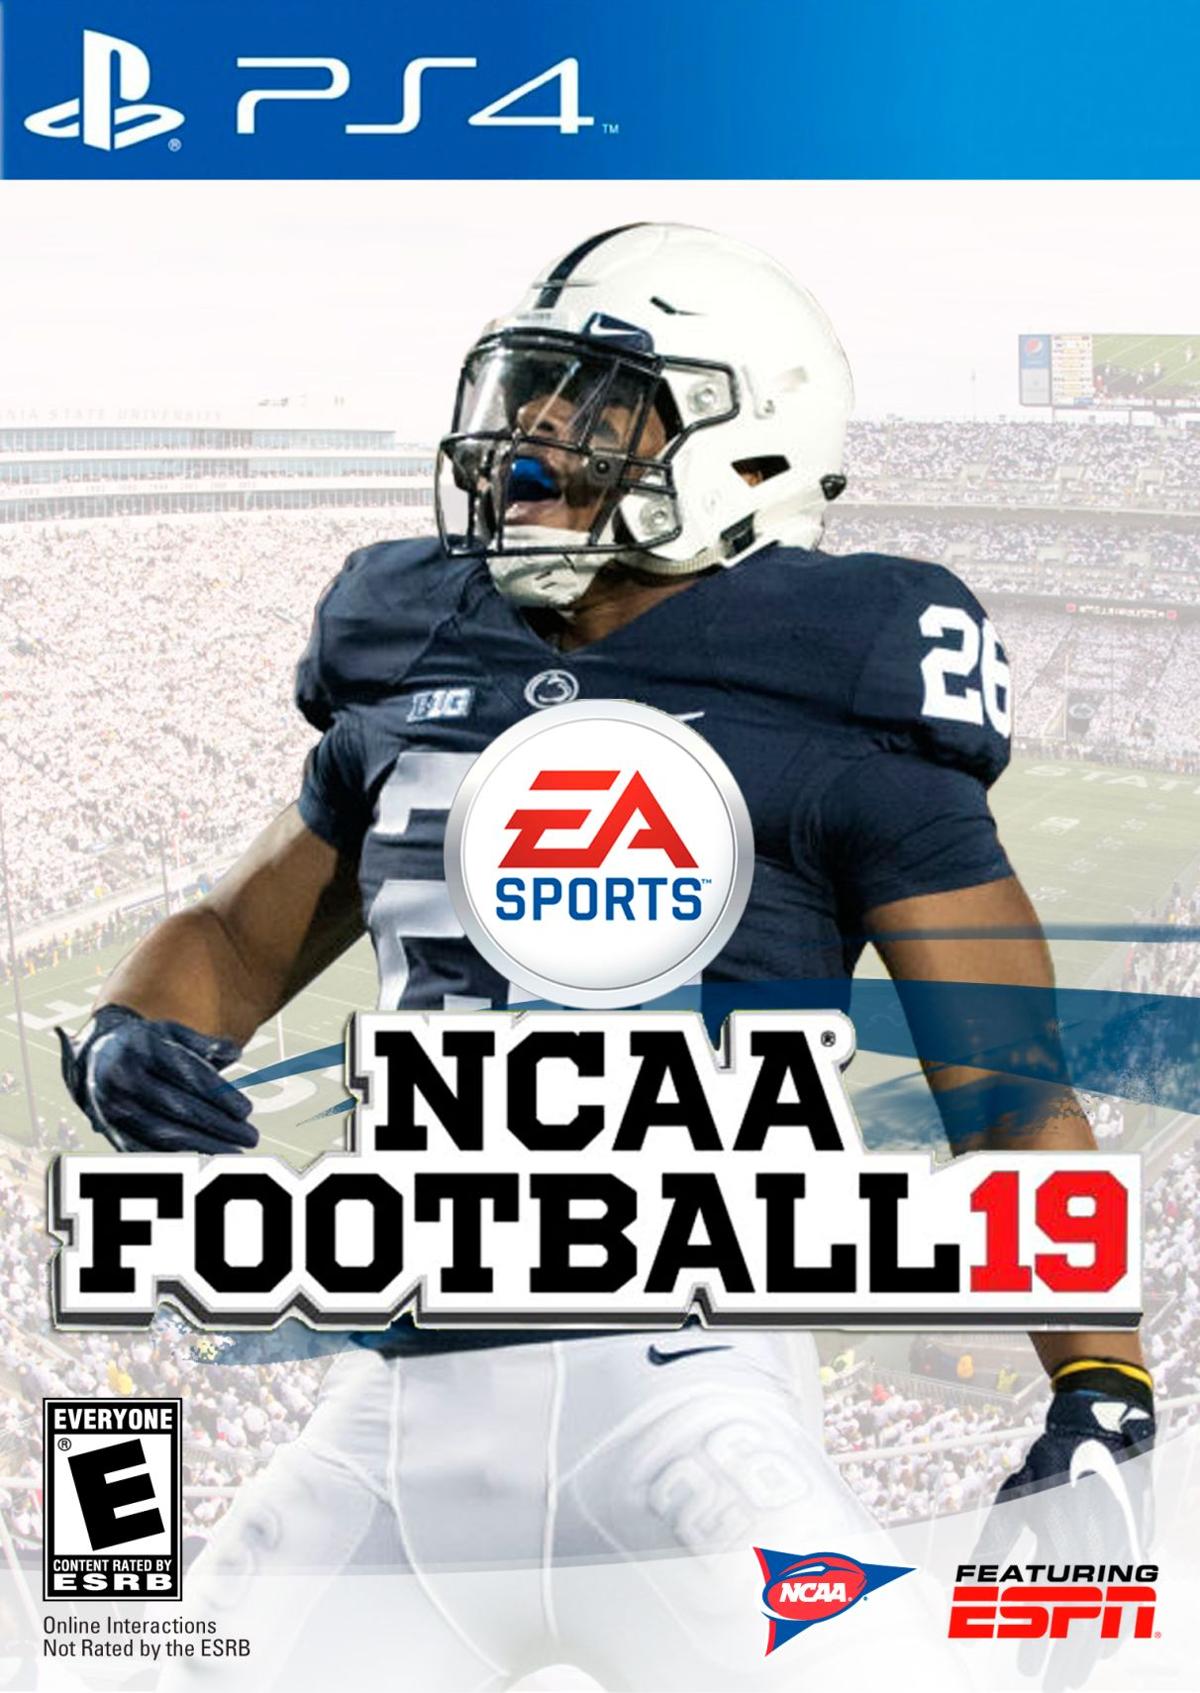 Why NCAA football video game needs to make its return | Which current